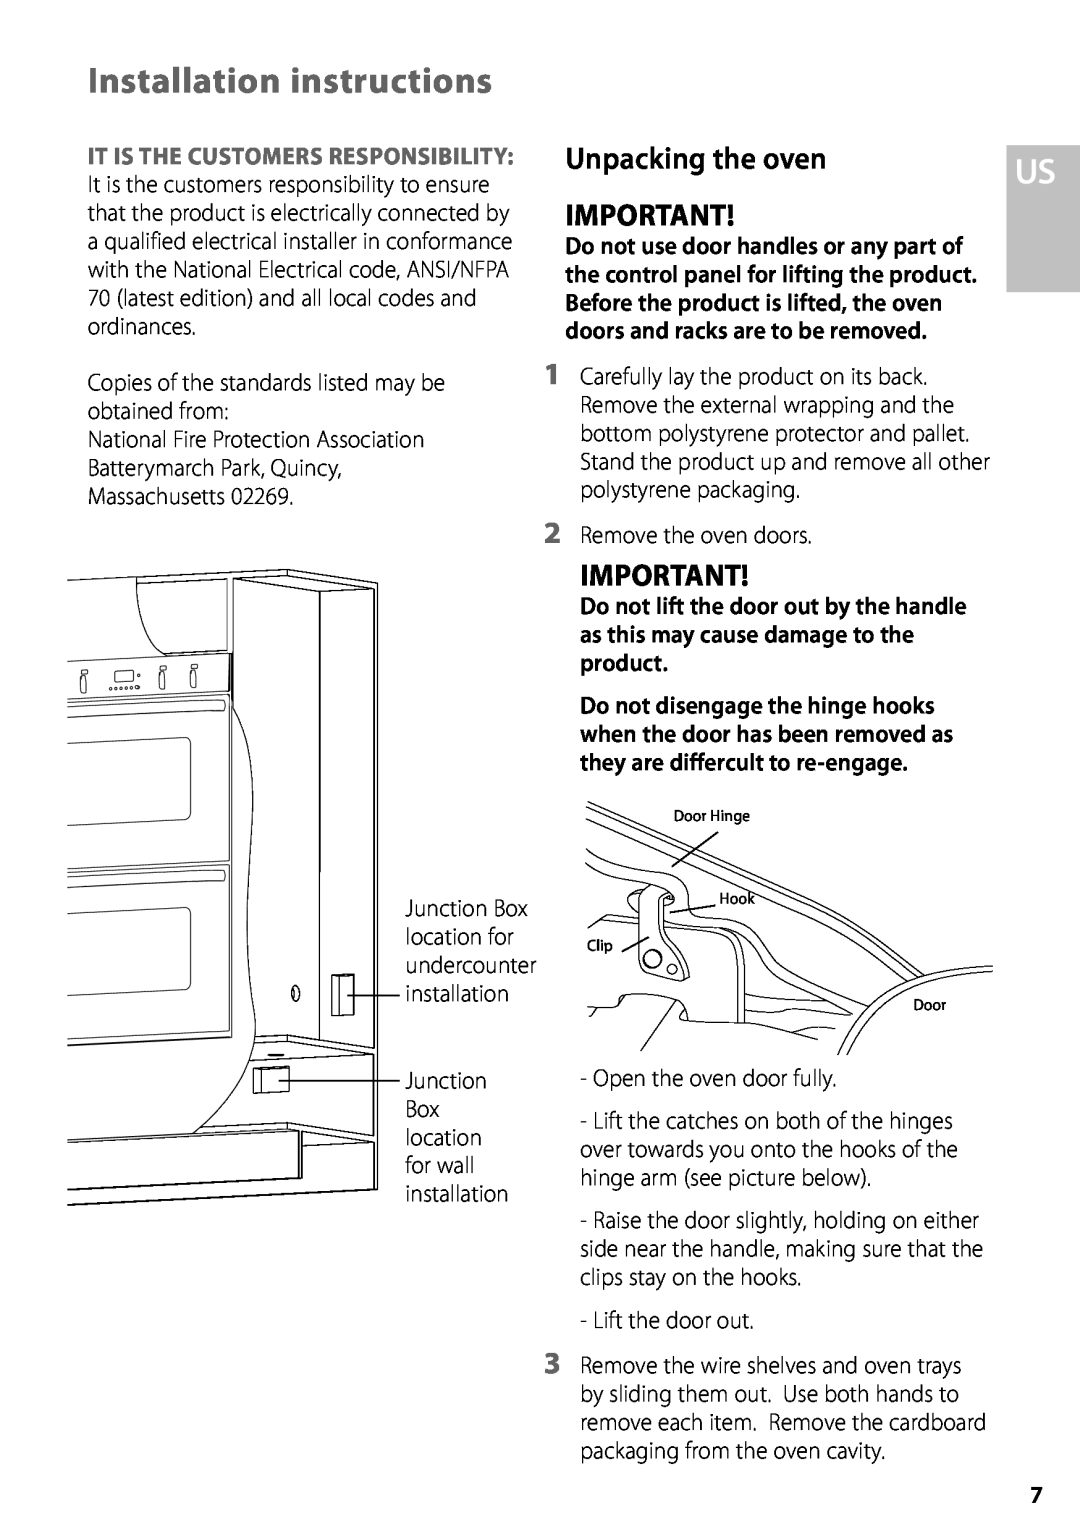 Fisher & Paykel OD302M Installation instructions, Copies of the standards listed may be obtained from, Lift the door out 